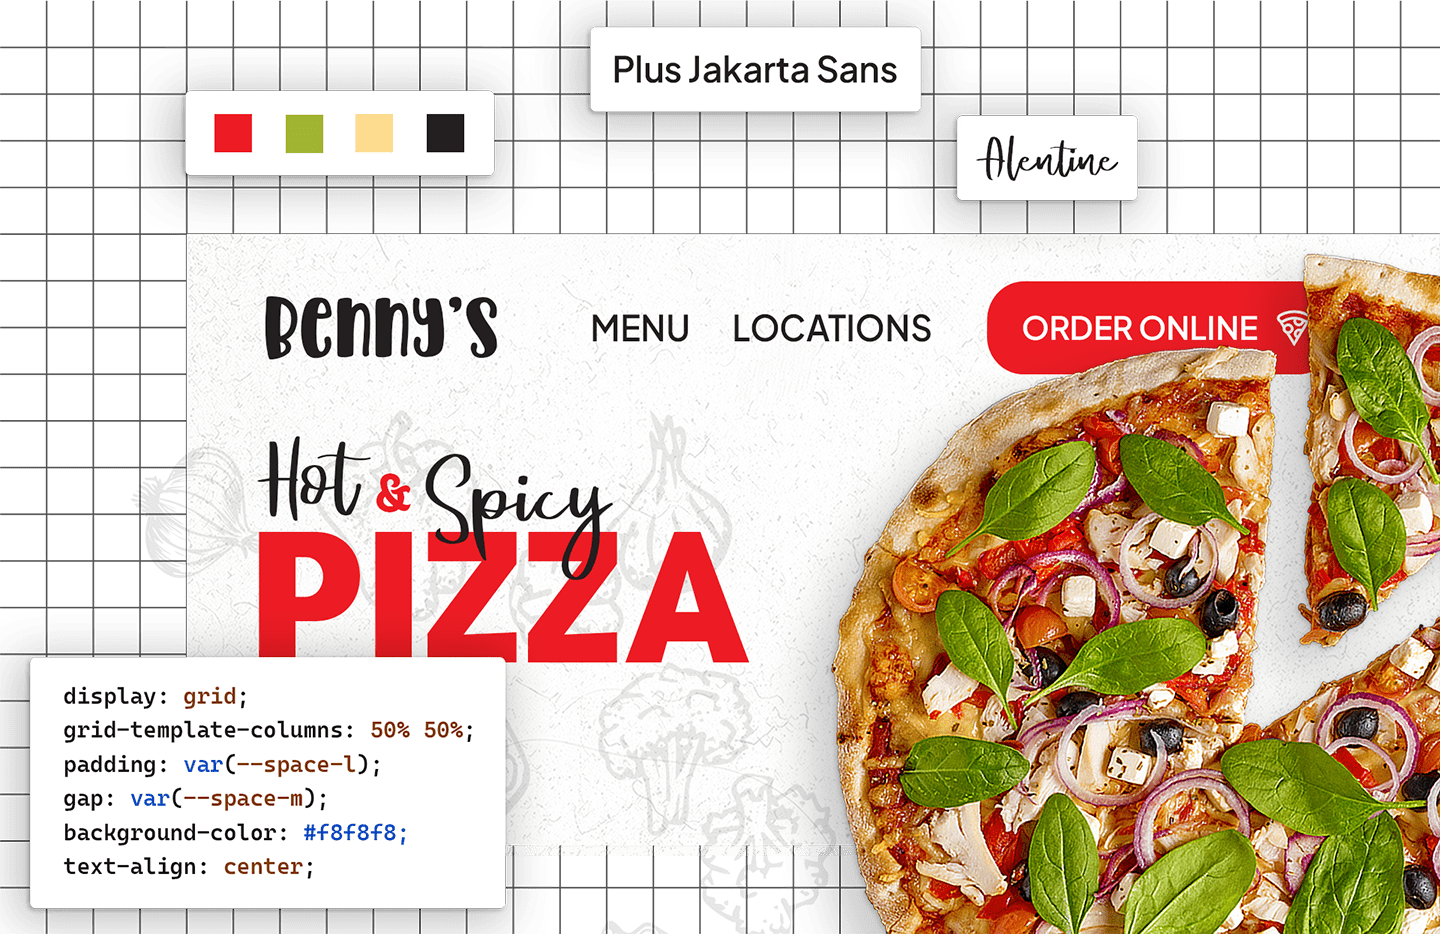 Visualisation of user interface and user experience design by Cherangat for Benny's Pizzeria, showing snippets of colour palettes, typography and code